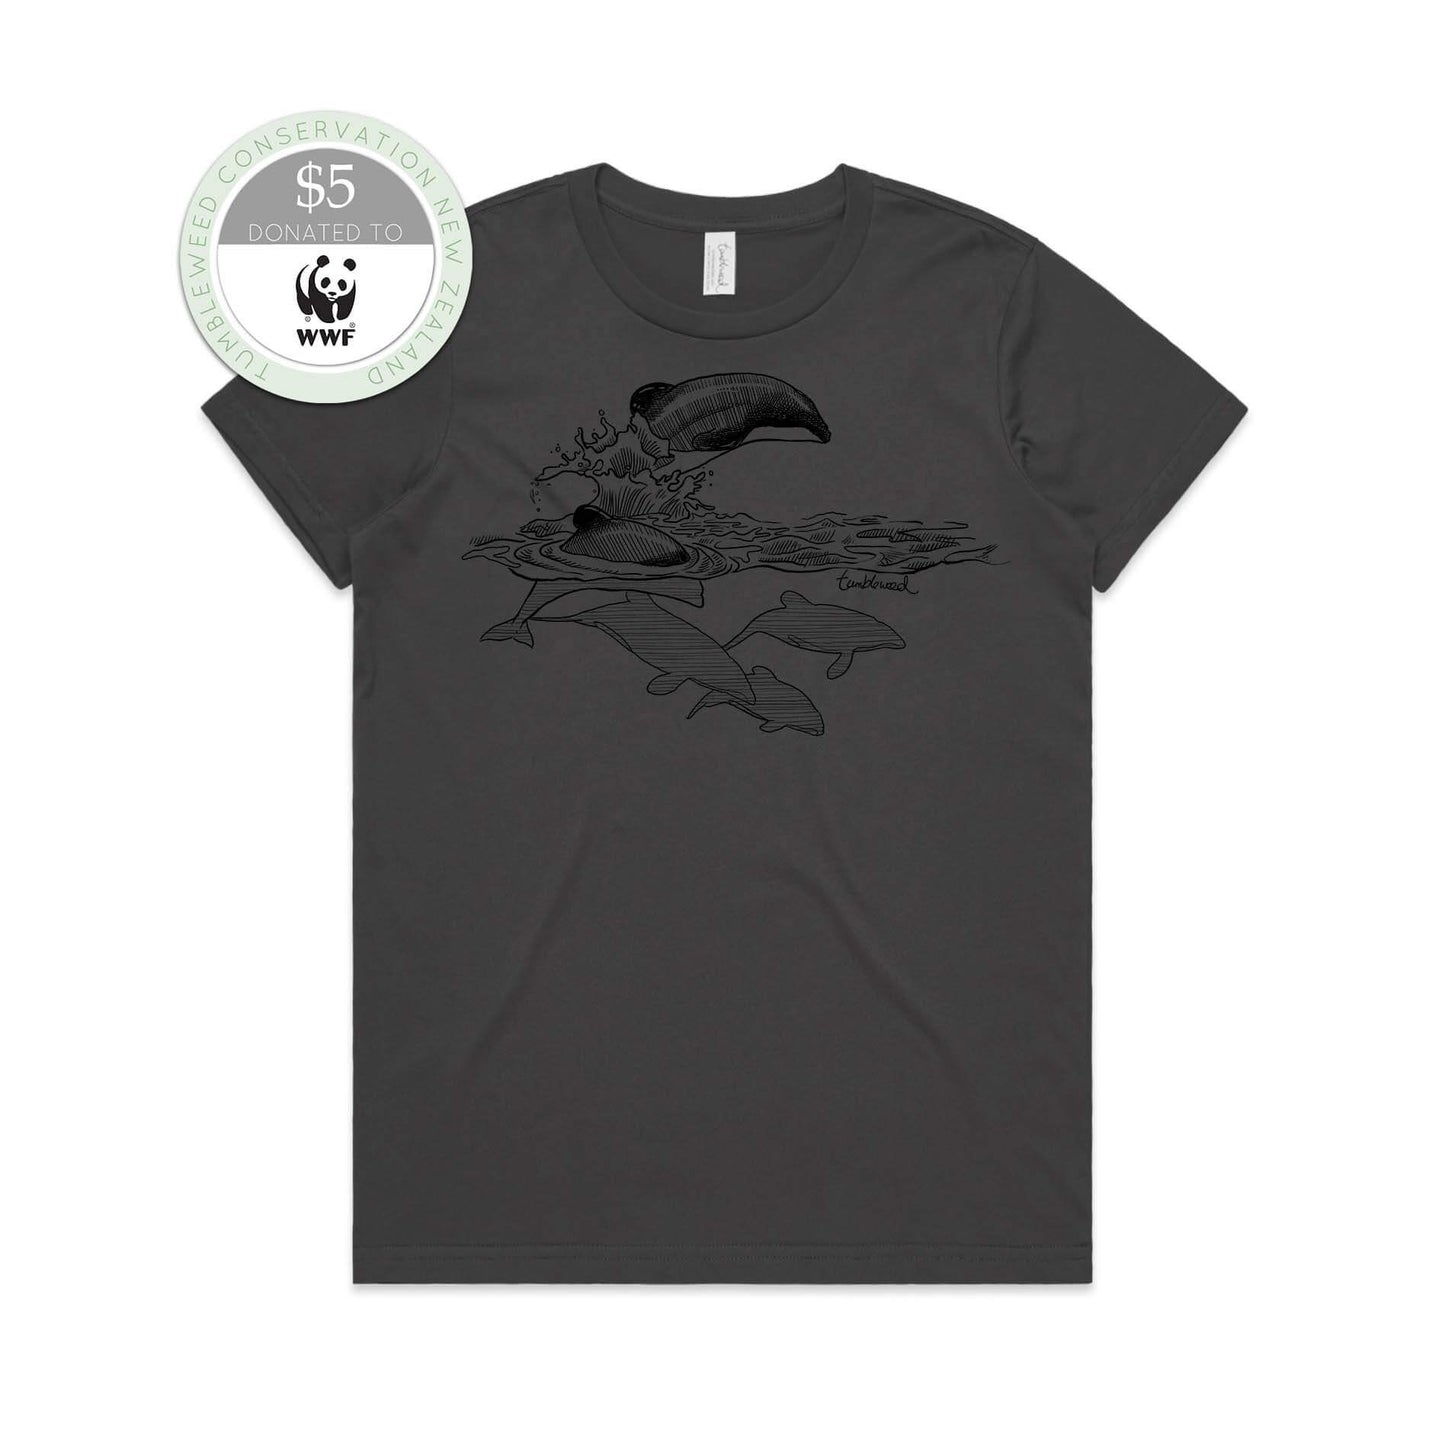 Charcoal, female t-shirt featuring a screen printed Māui dolphin design.